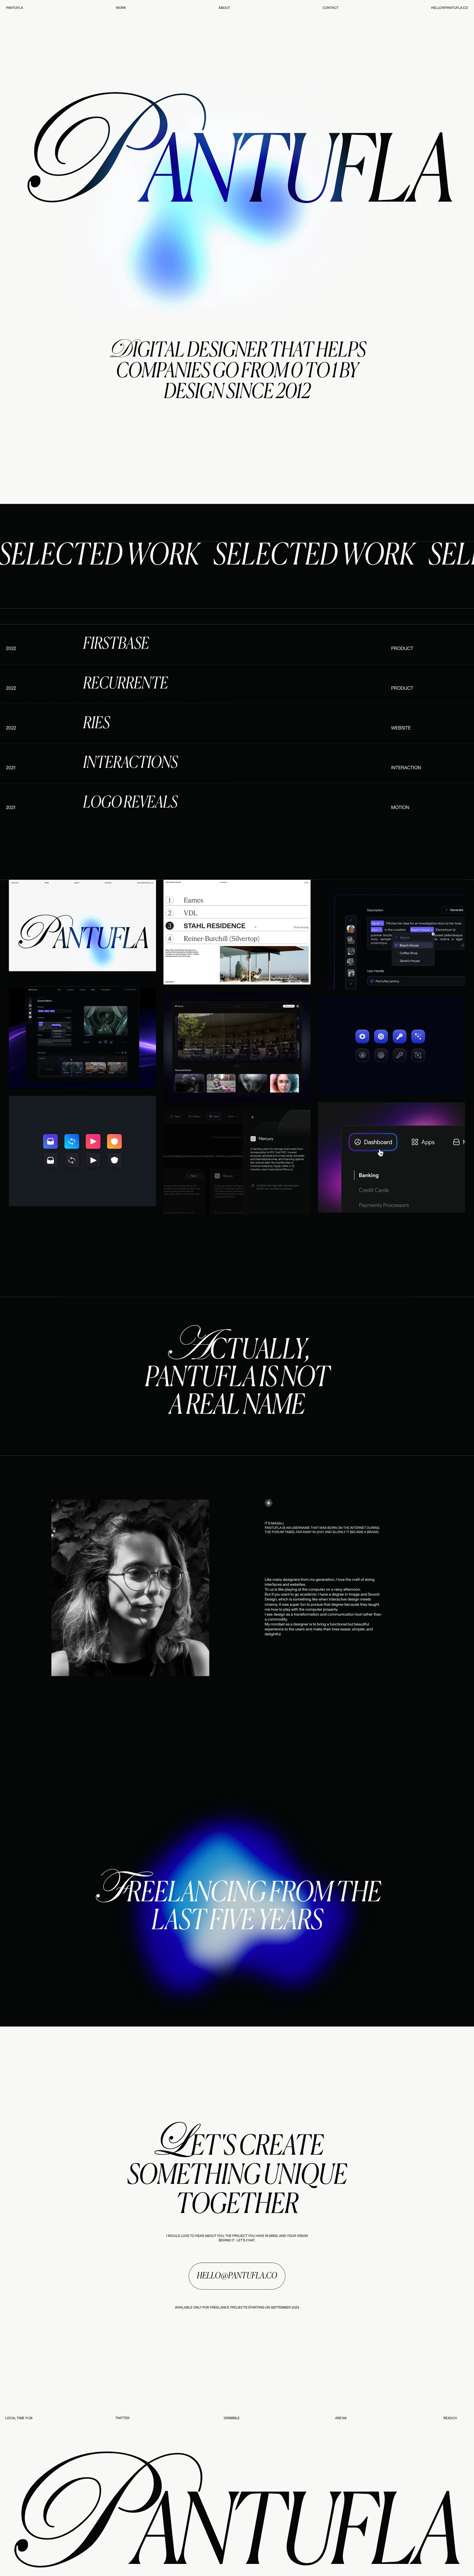 Pantufla Cuantica Landing Page Example: My mindset as a designer is to bring a functional but beautiful experience to the users and make their lives easier, simpler, and delightful.